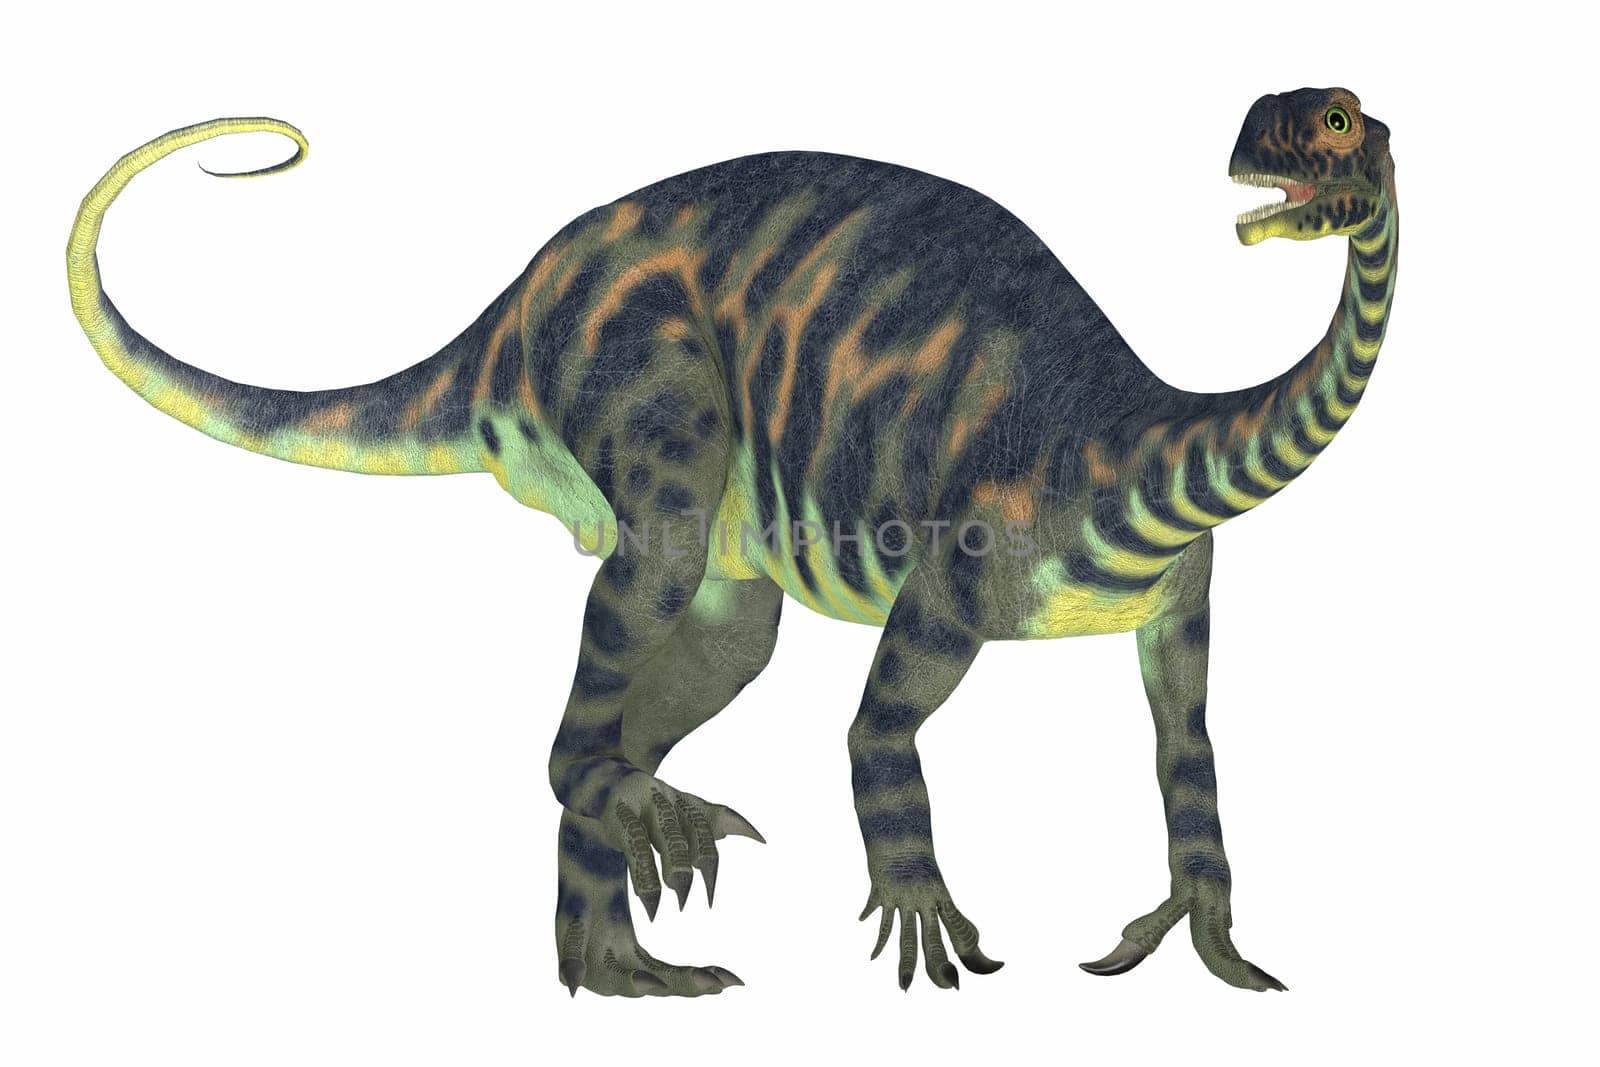 Massospondylus was a prosauropod dinosaur from the Jurassic Age of Africa and was a herbivore.